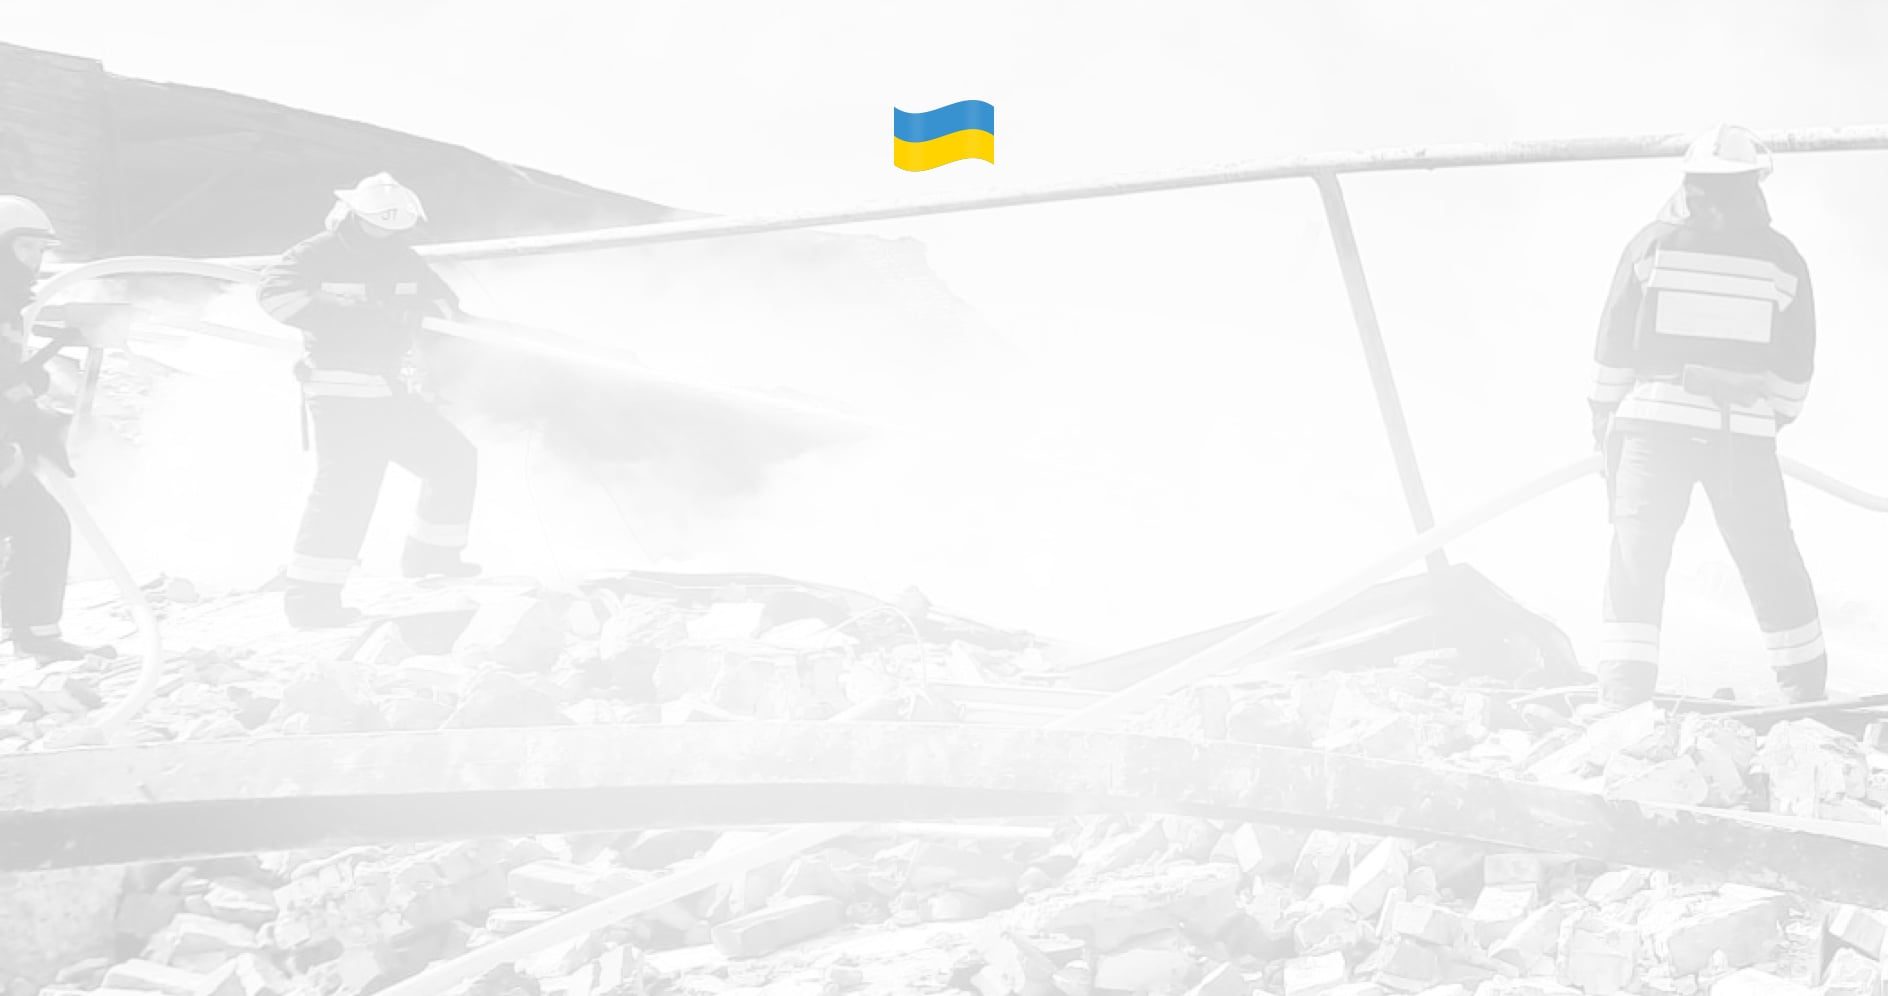 Charity Funds to Support Ukraine